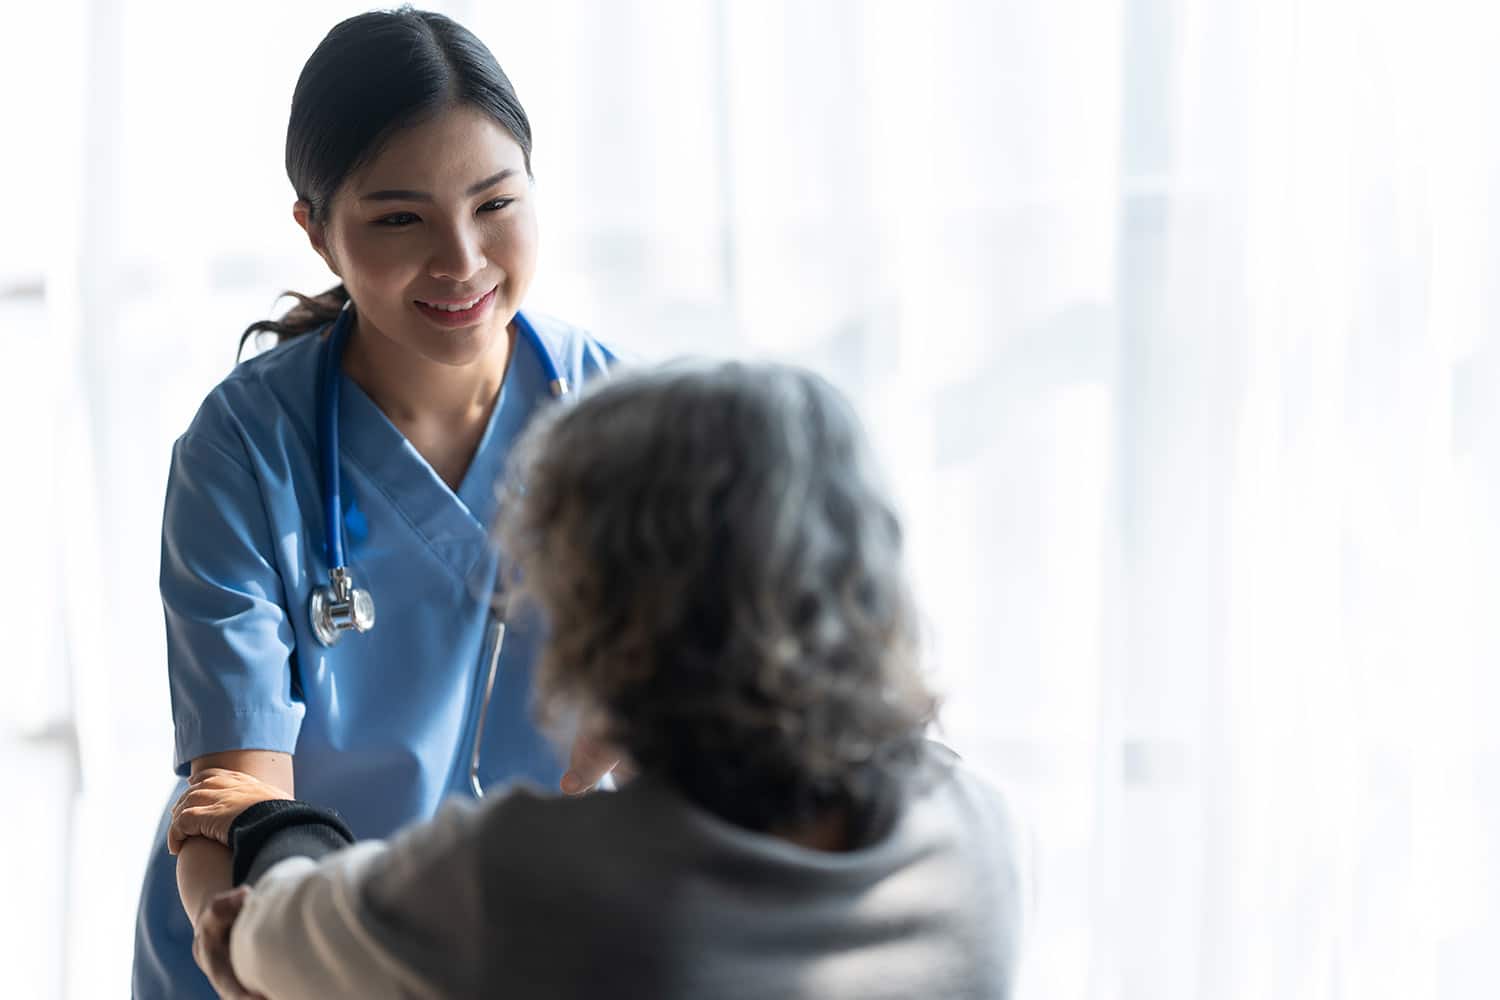 The Expanding Role of Remote Medical Assistants